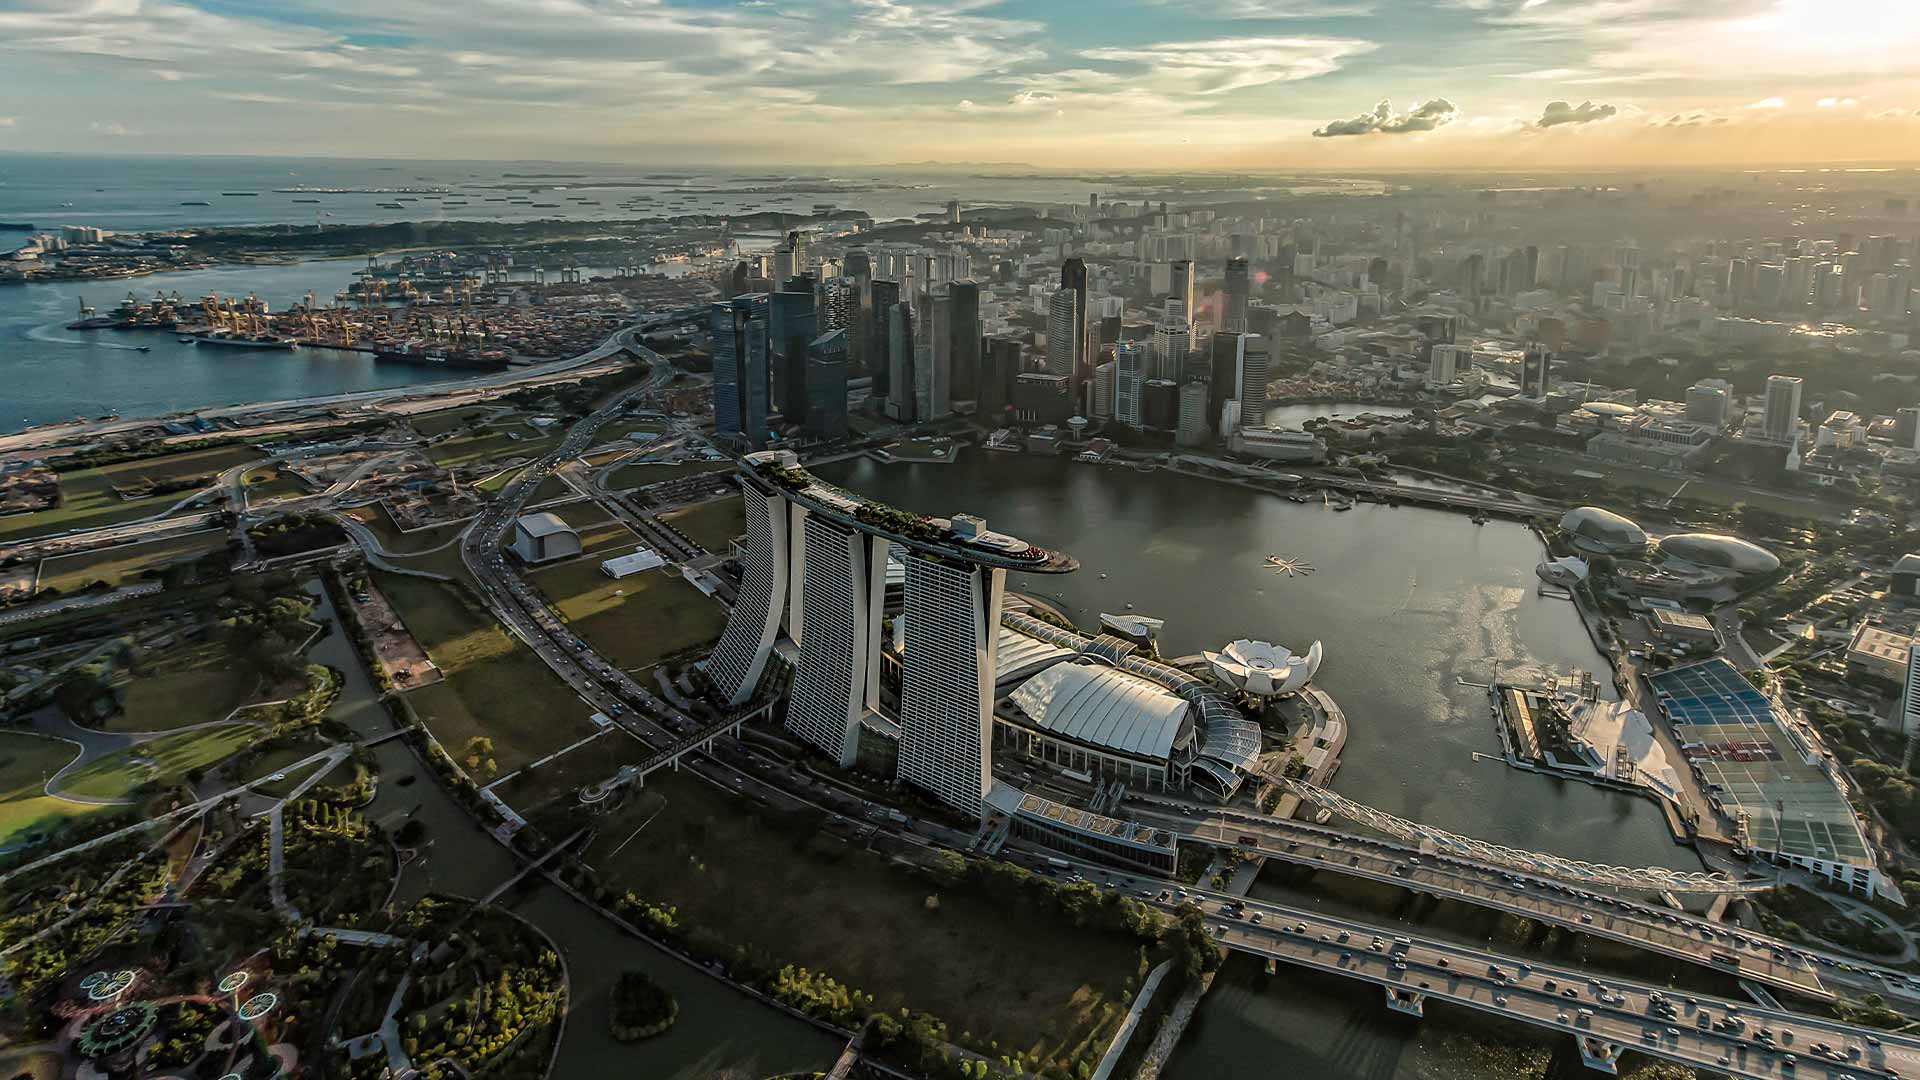 Overview of Marina Bay in Singapore, with Marina Bay Sands located along the waterfront